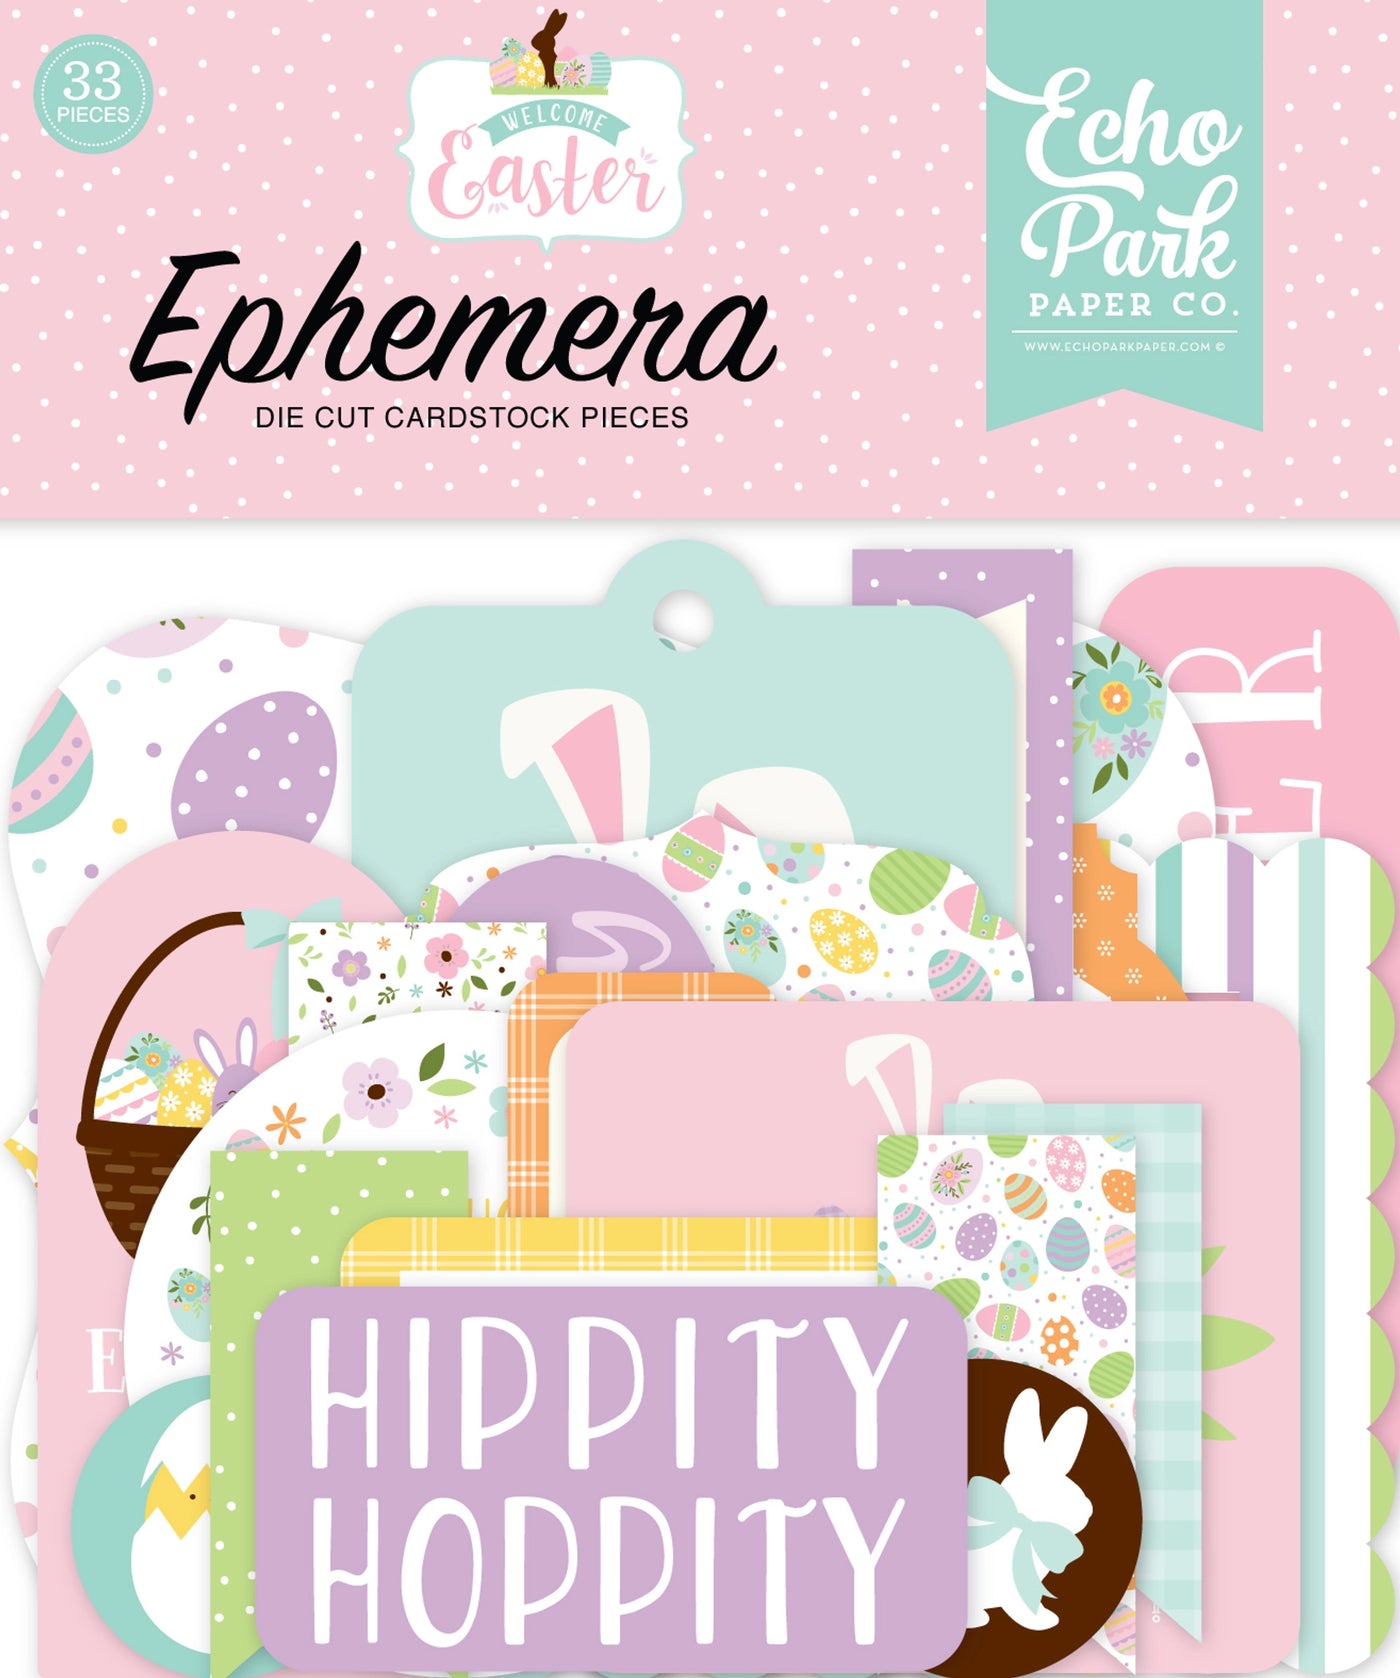 Welcome Easter Ephemera Die Cut Cardstock Pack. Pack includes 33 different die-cut shapes ready to embellish any project. Package size is 4.5" x 5.25"